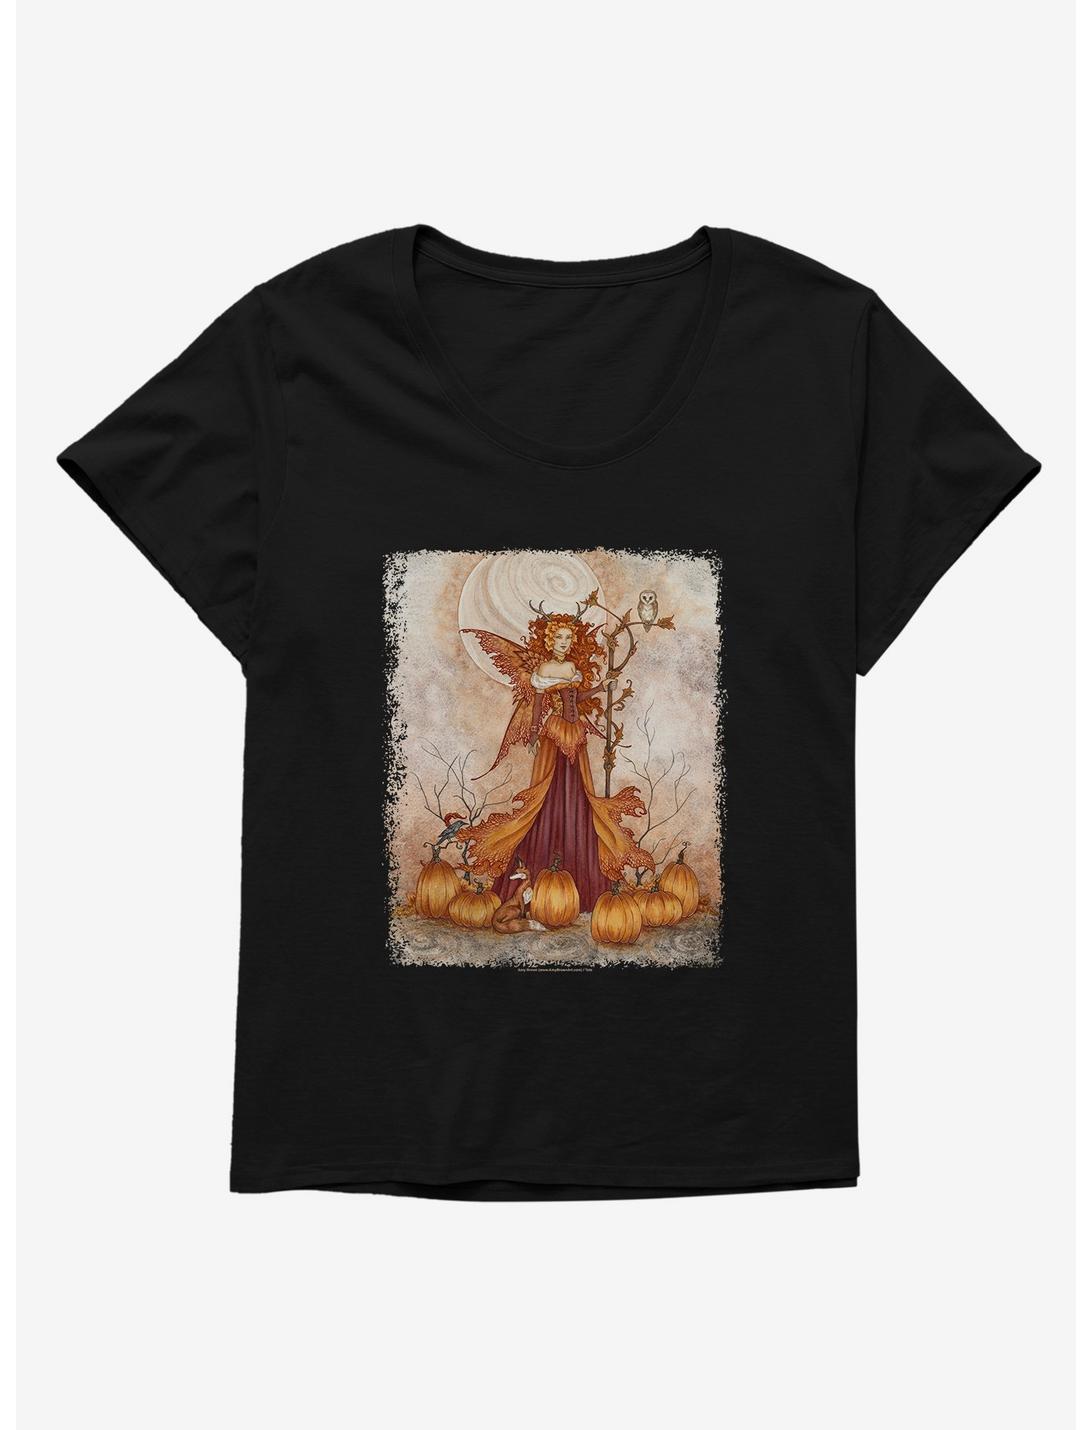 Pumpkin Queen Womens T-Shirt Plus Size by Amy Brown, , hi-res